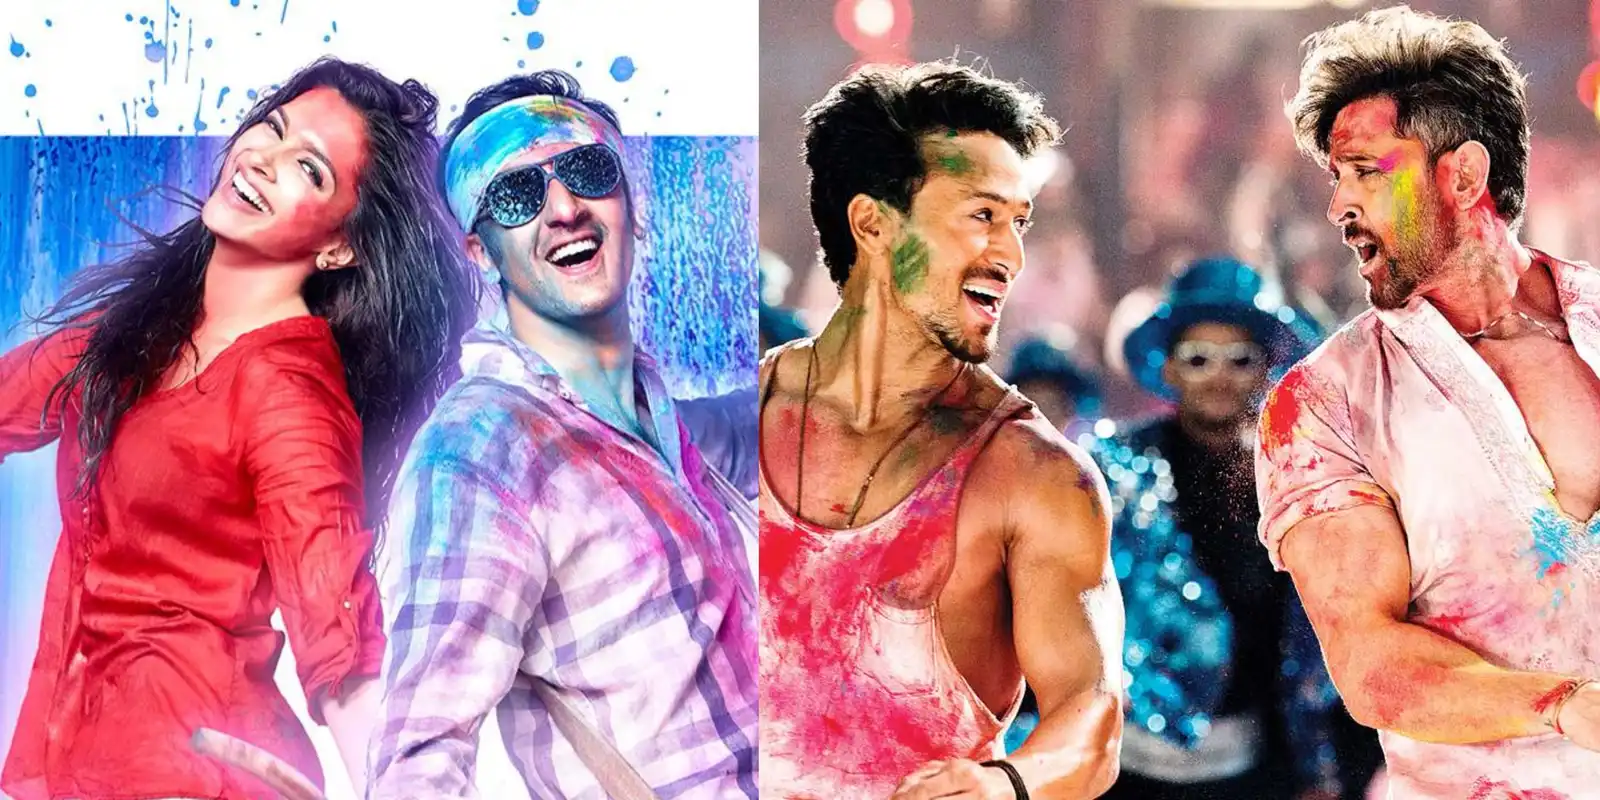 Happy Holi 2020: Top 7 Ultimate Party Songs That Should Be On Your Holi Playlist This Year